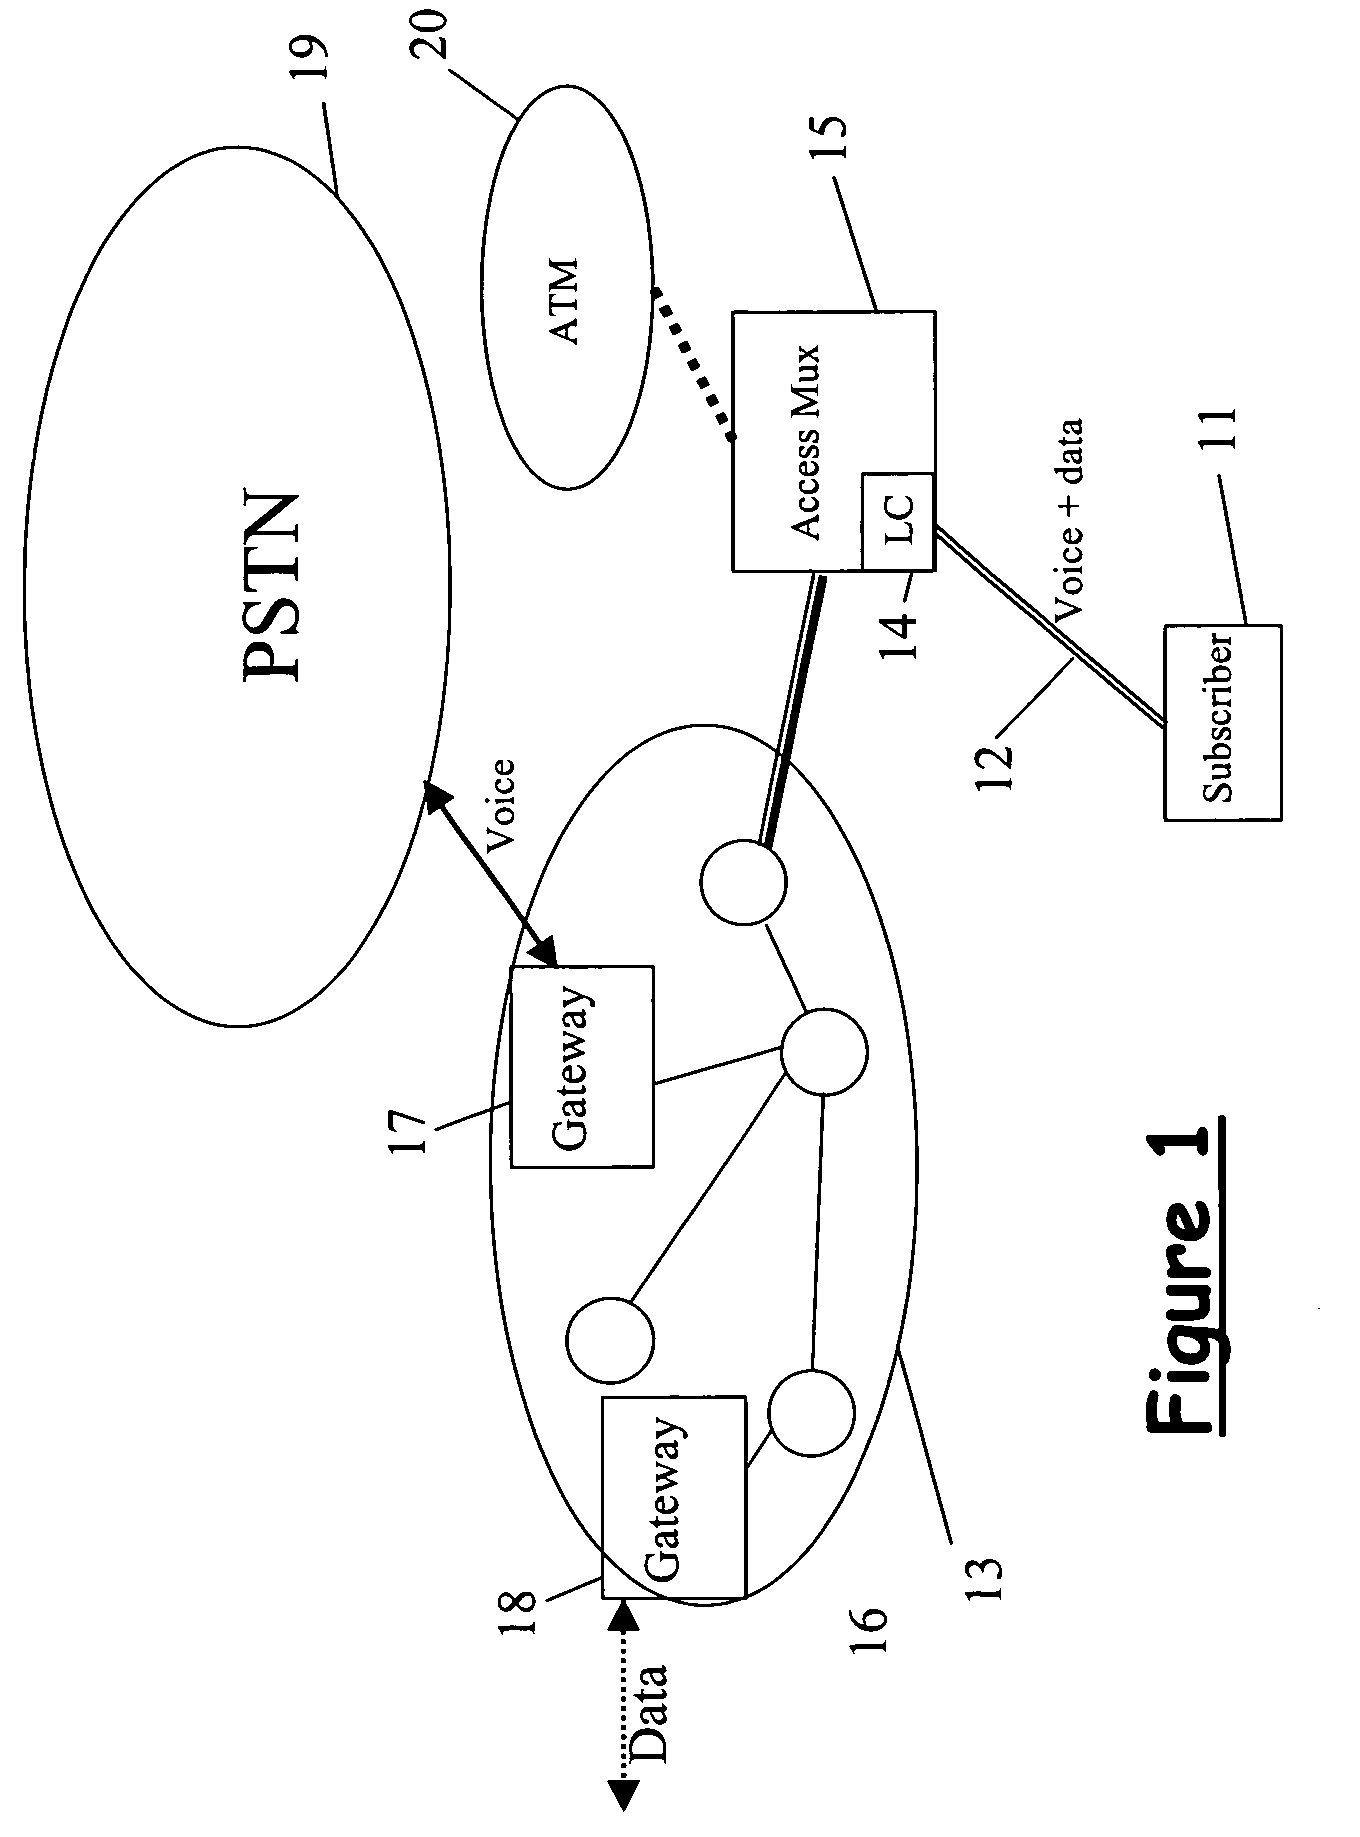 Packet communications system and method